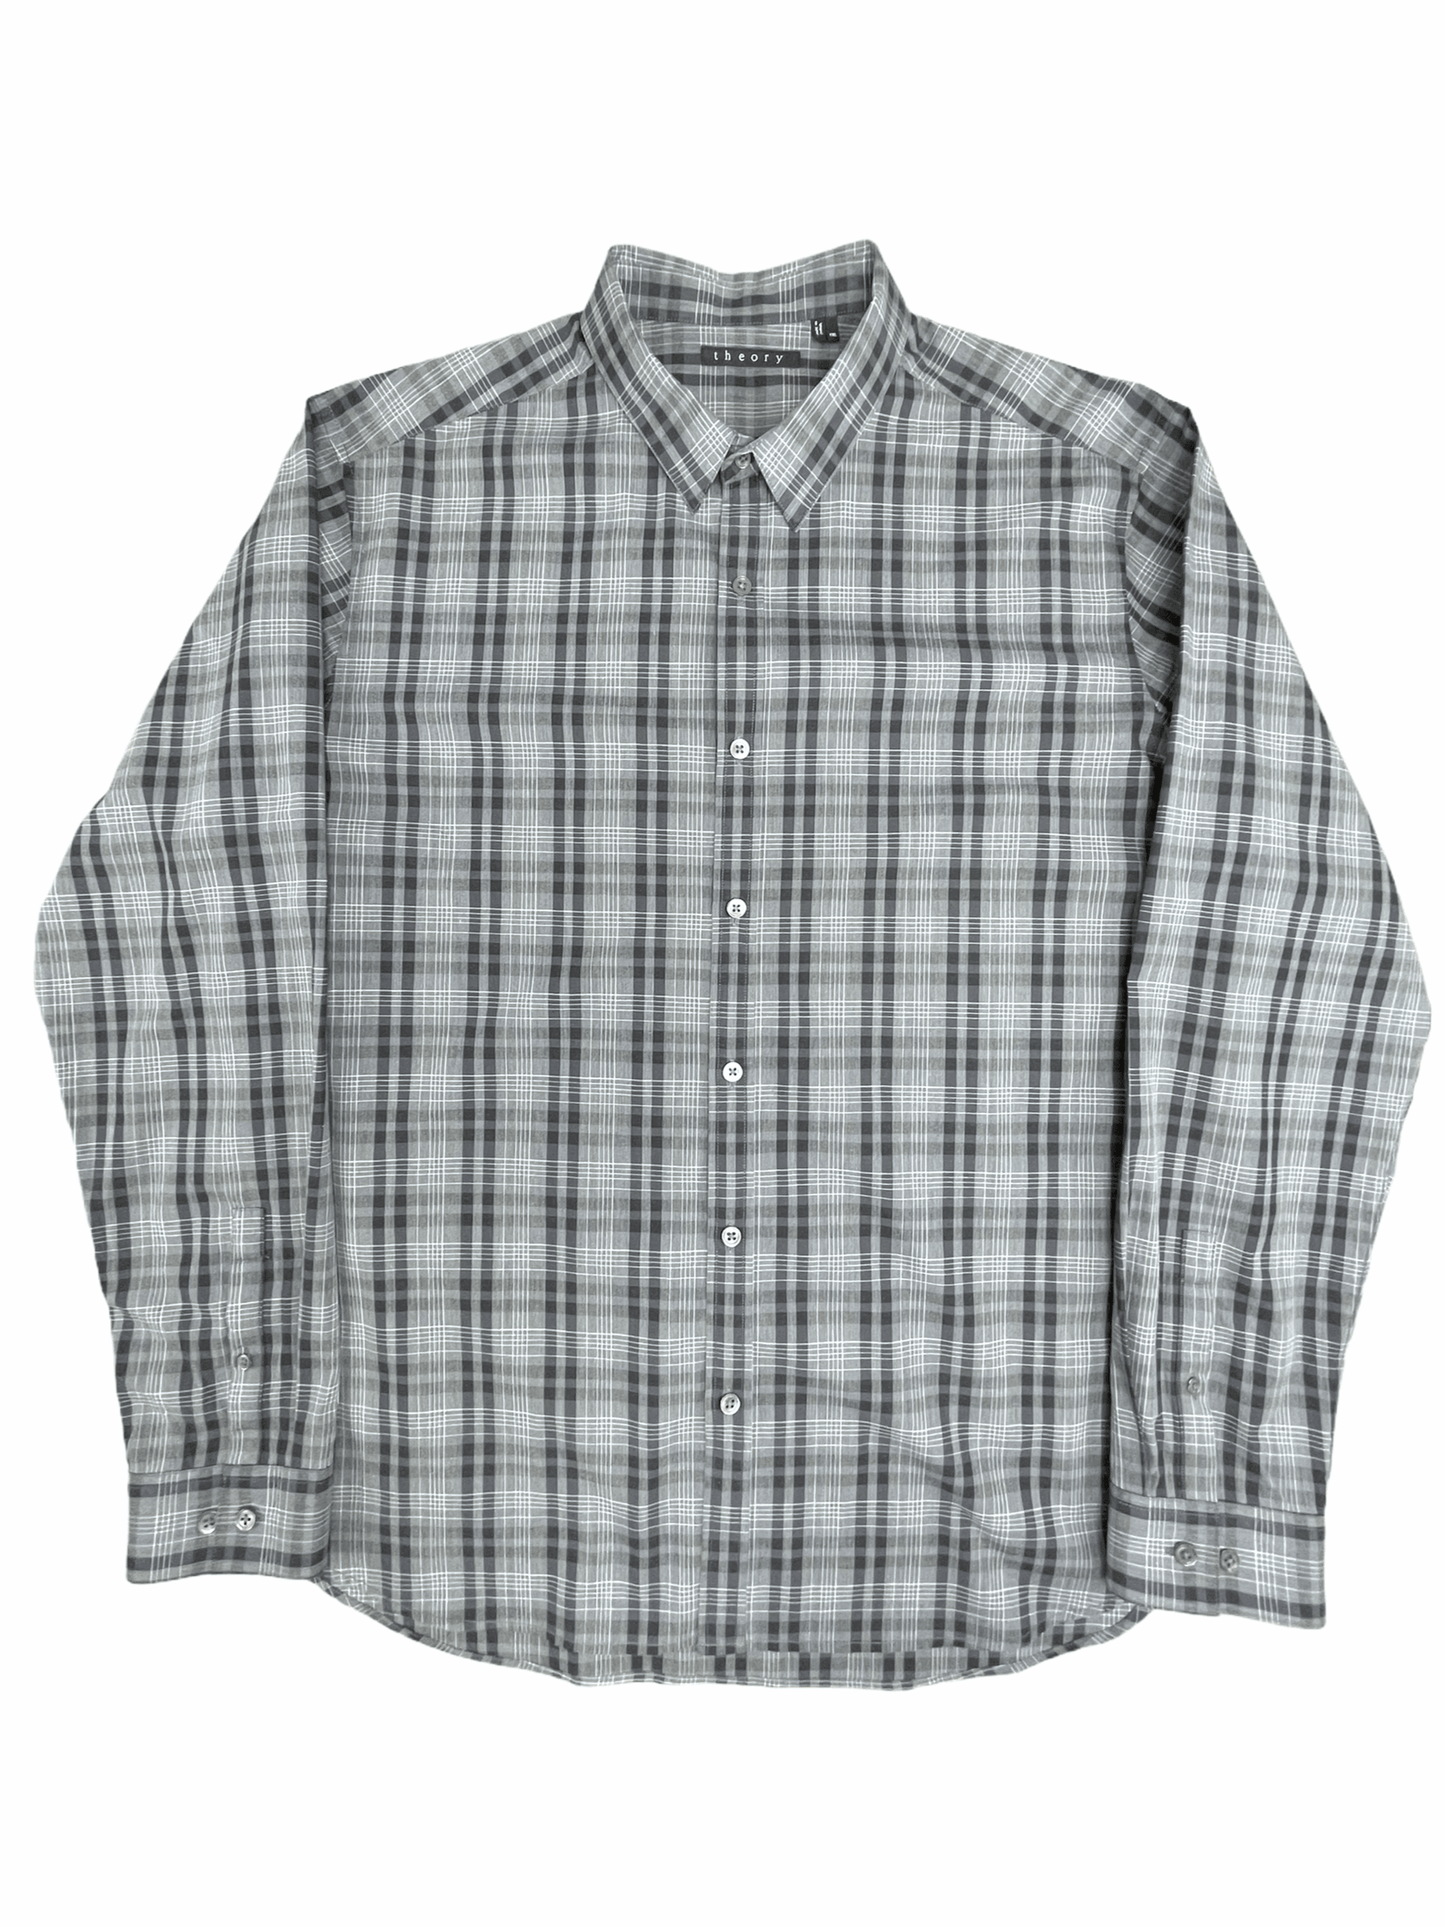 Theory Grey Check Casual Button Up Shirt 16 / 41 - XXL - Genuine Design Luxury Consignment